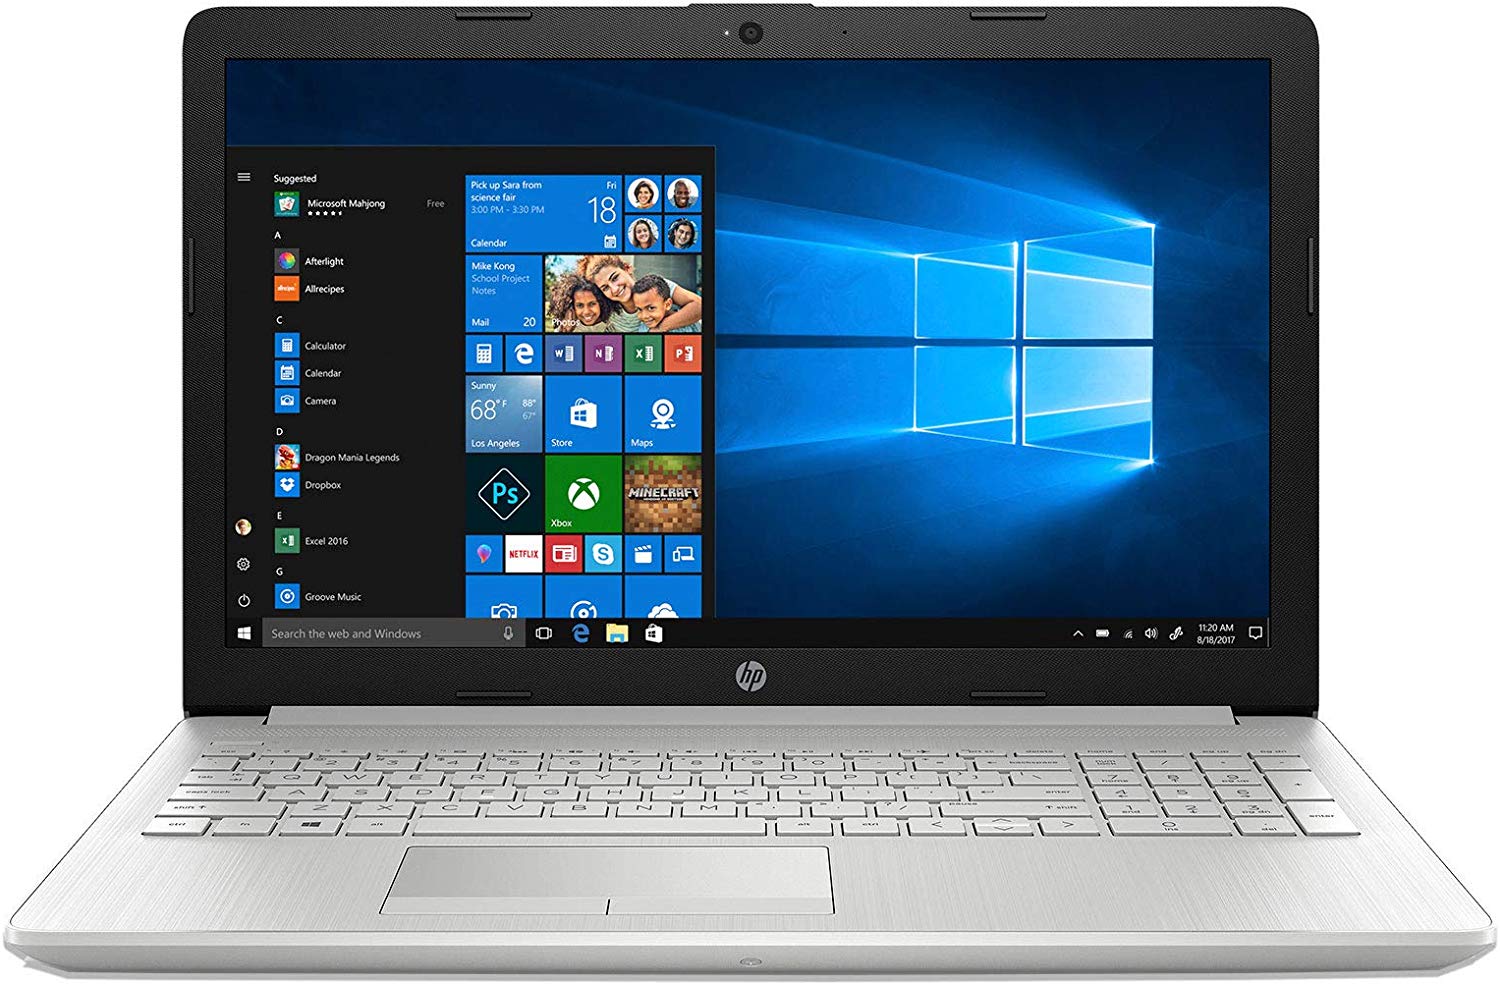 Affordable & Best Laptop Under Rs 30000 in India (2019) - UNPAID REVIEW